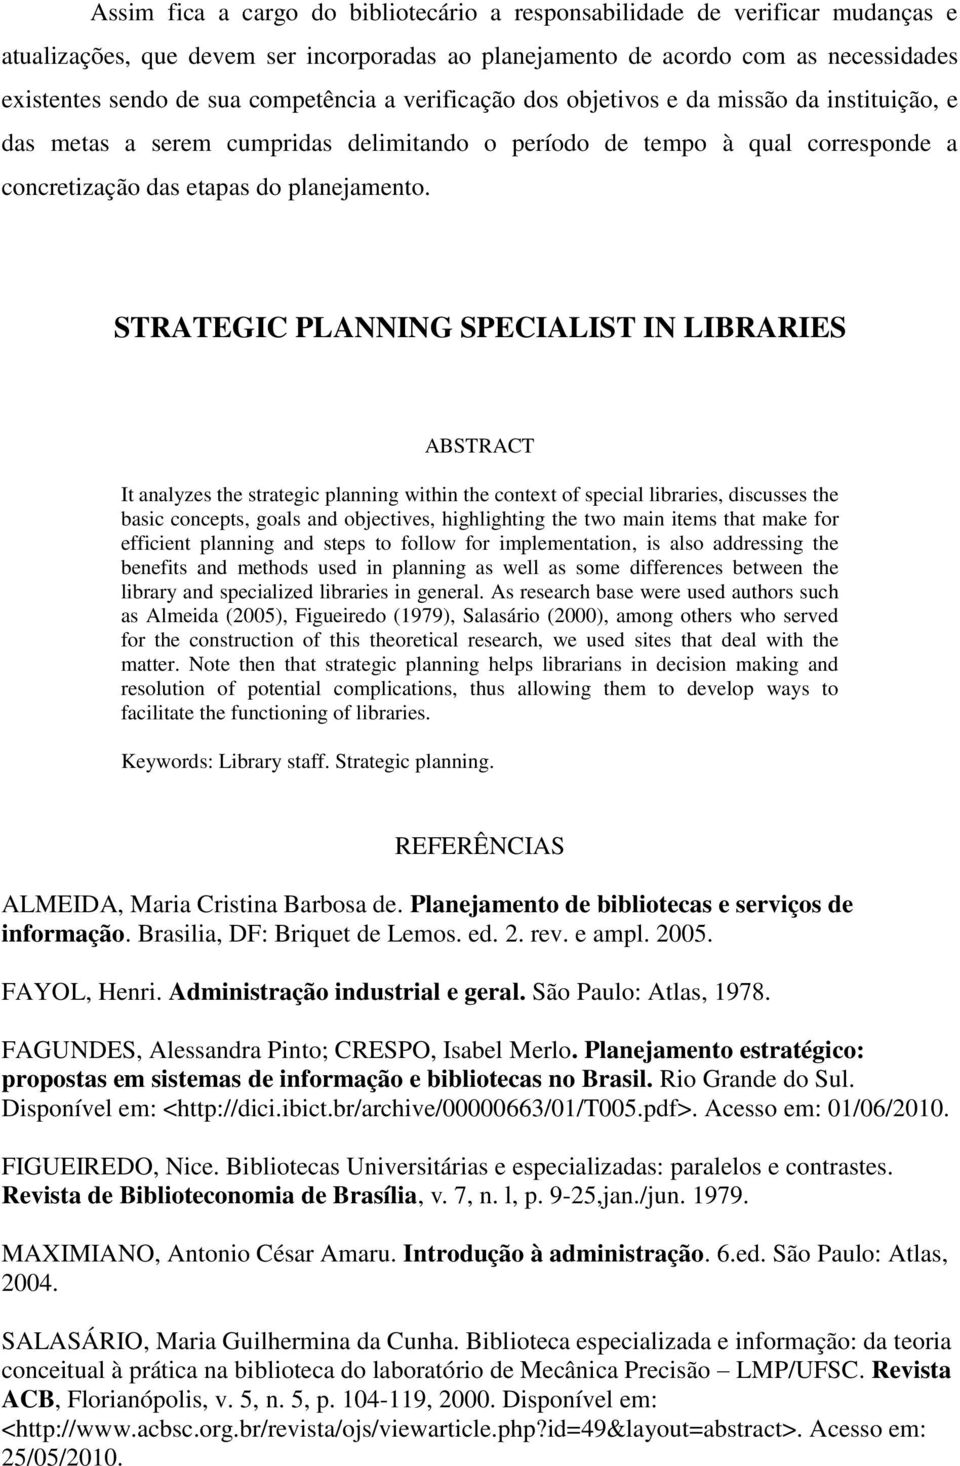 STRATEGIC PLANNING SPECIALIST IN LIBRARIES ABSTRACT It analyzes the strategic planning within the context of special libraries, discusses the basic concepts, goals and objectives, highlighting the